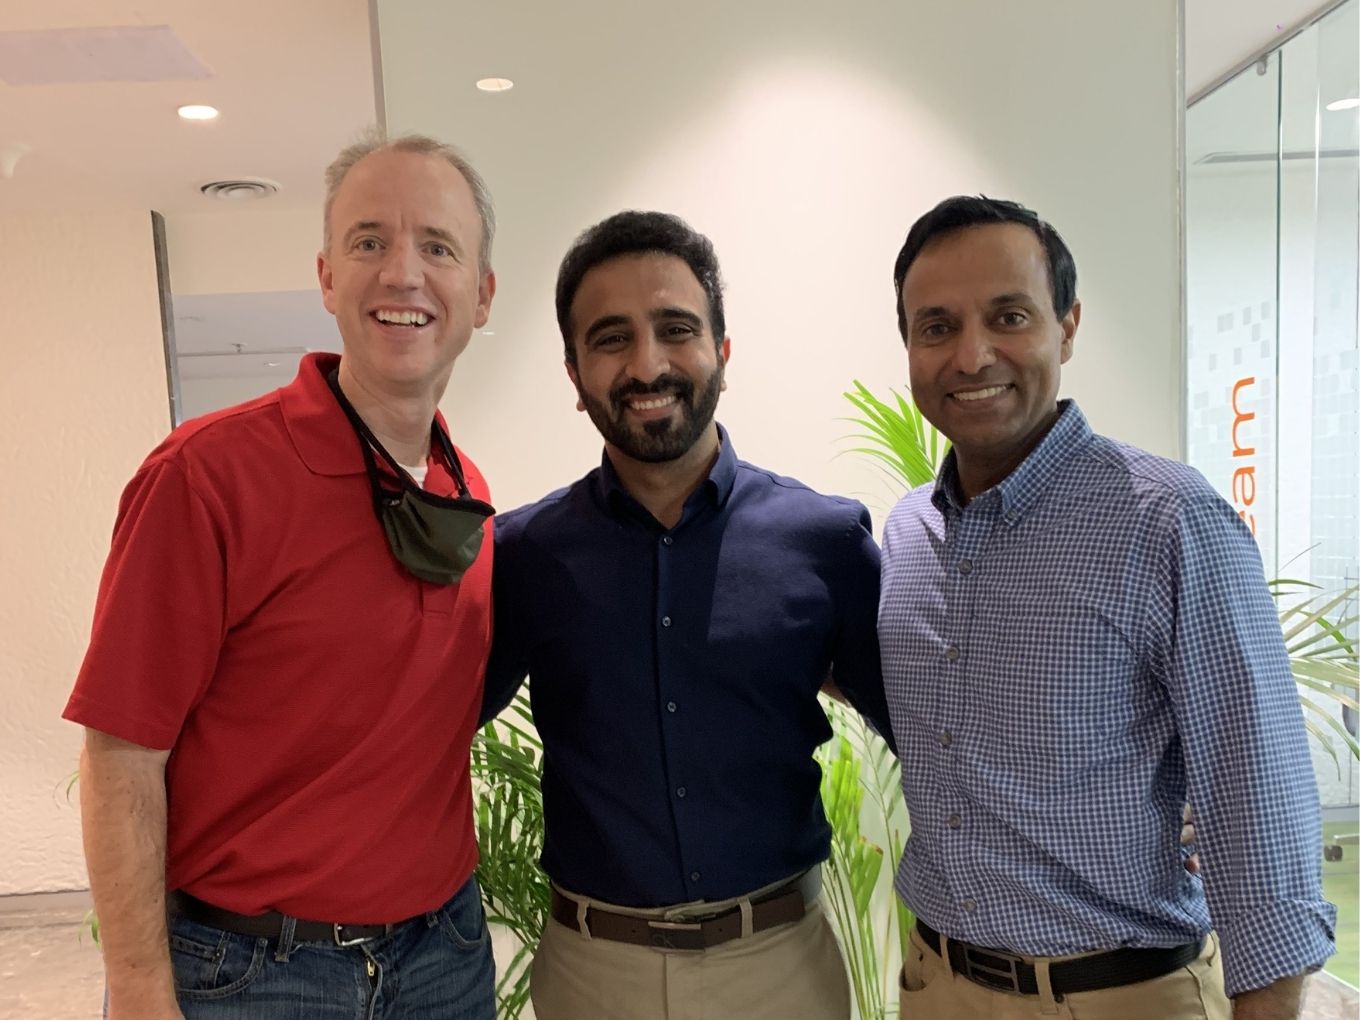 Ryan Mertes - Chief Solutions Officer Dairy.com, Samarth Setia, CEO & Co-founder, Mr. Milkman, and on right is Harjot Sachdeva - Operating Partner Banneker Partners (L to R)